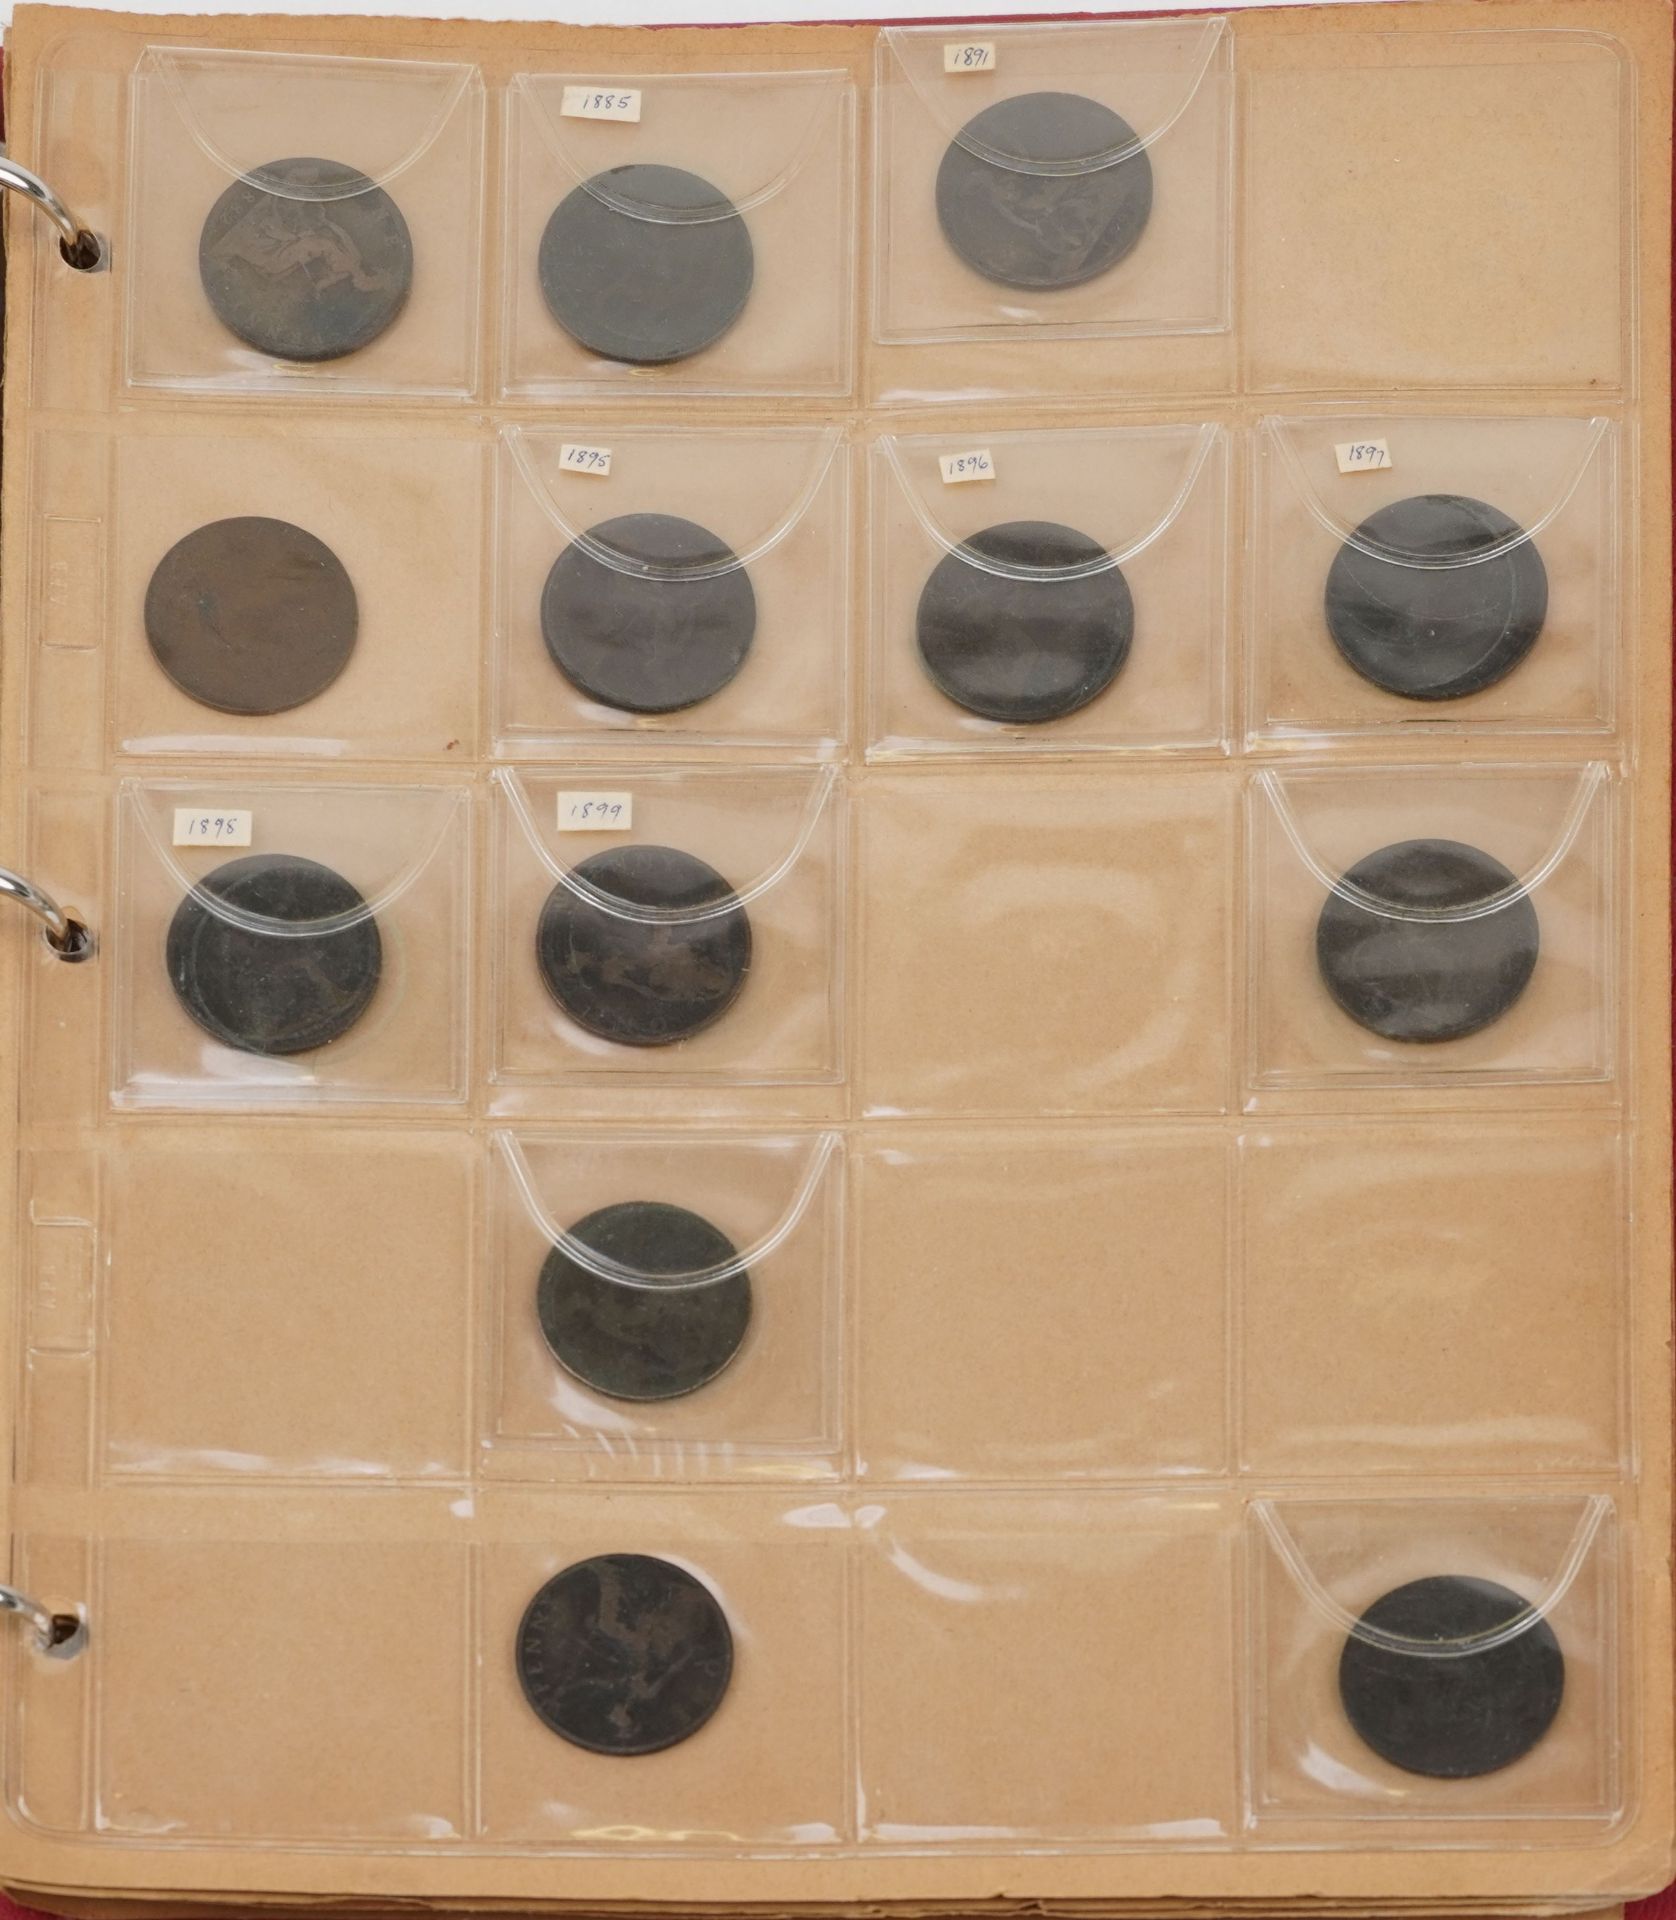 Charles II and later British coinage arranged in an album including farthings and pennies - Image 6 of 9